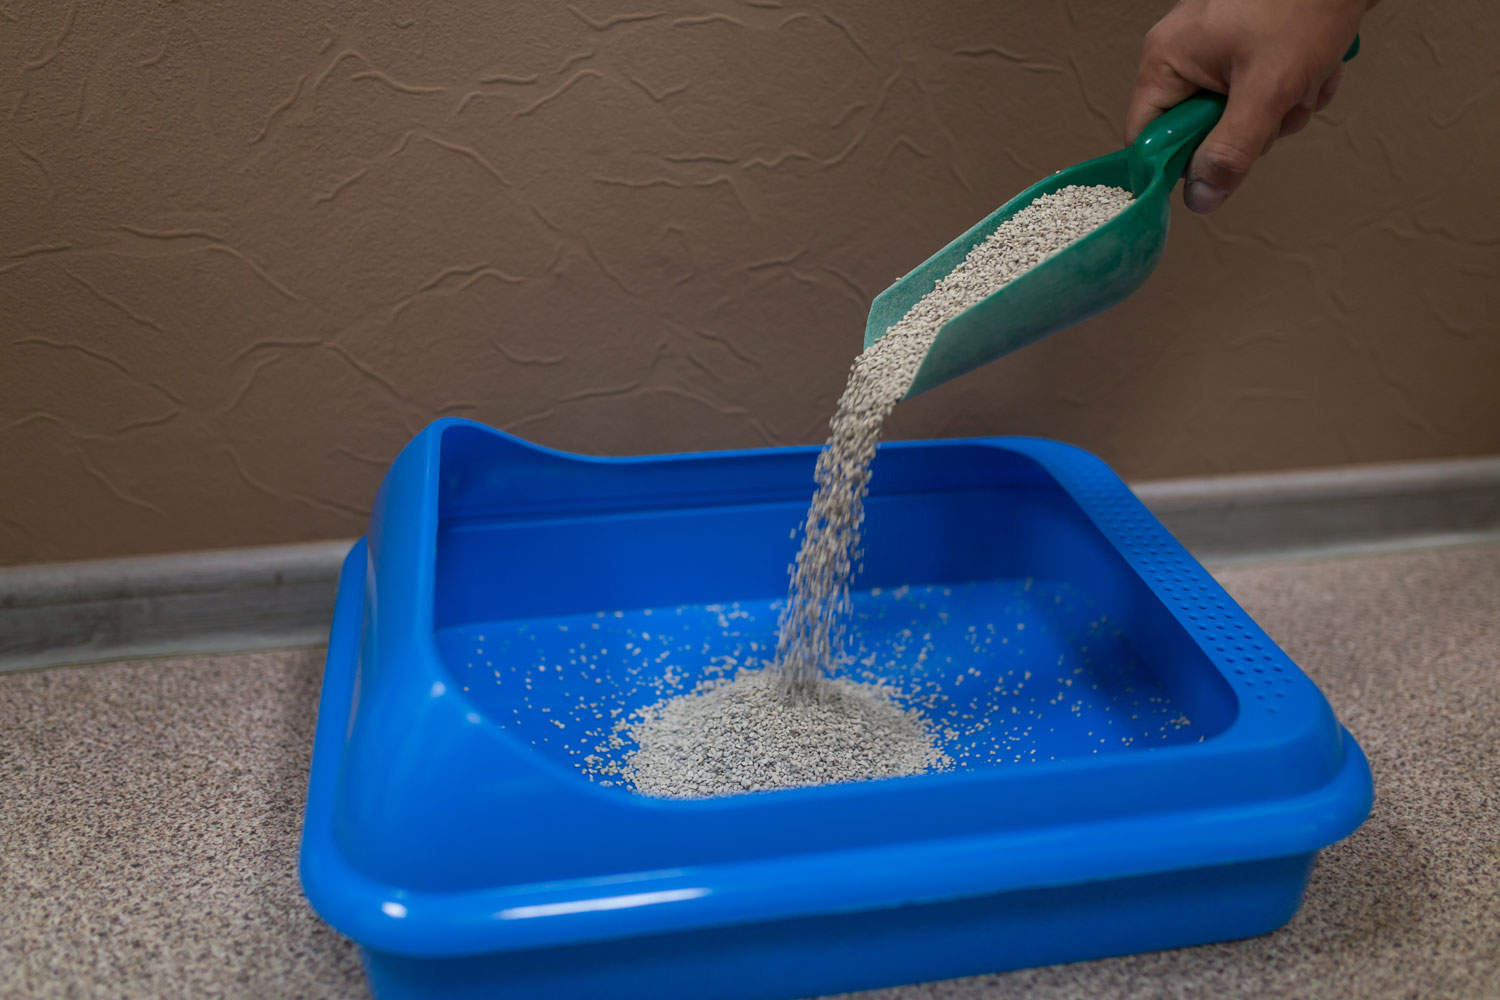 Pouring cat litter to blue litter box